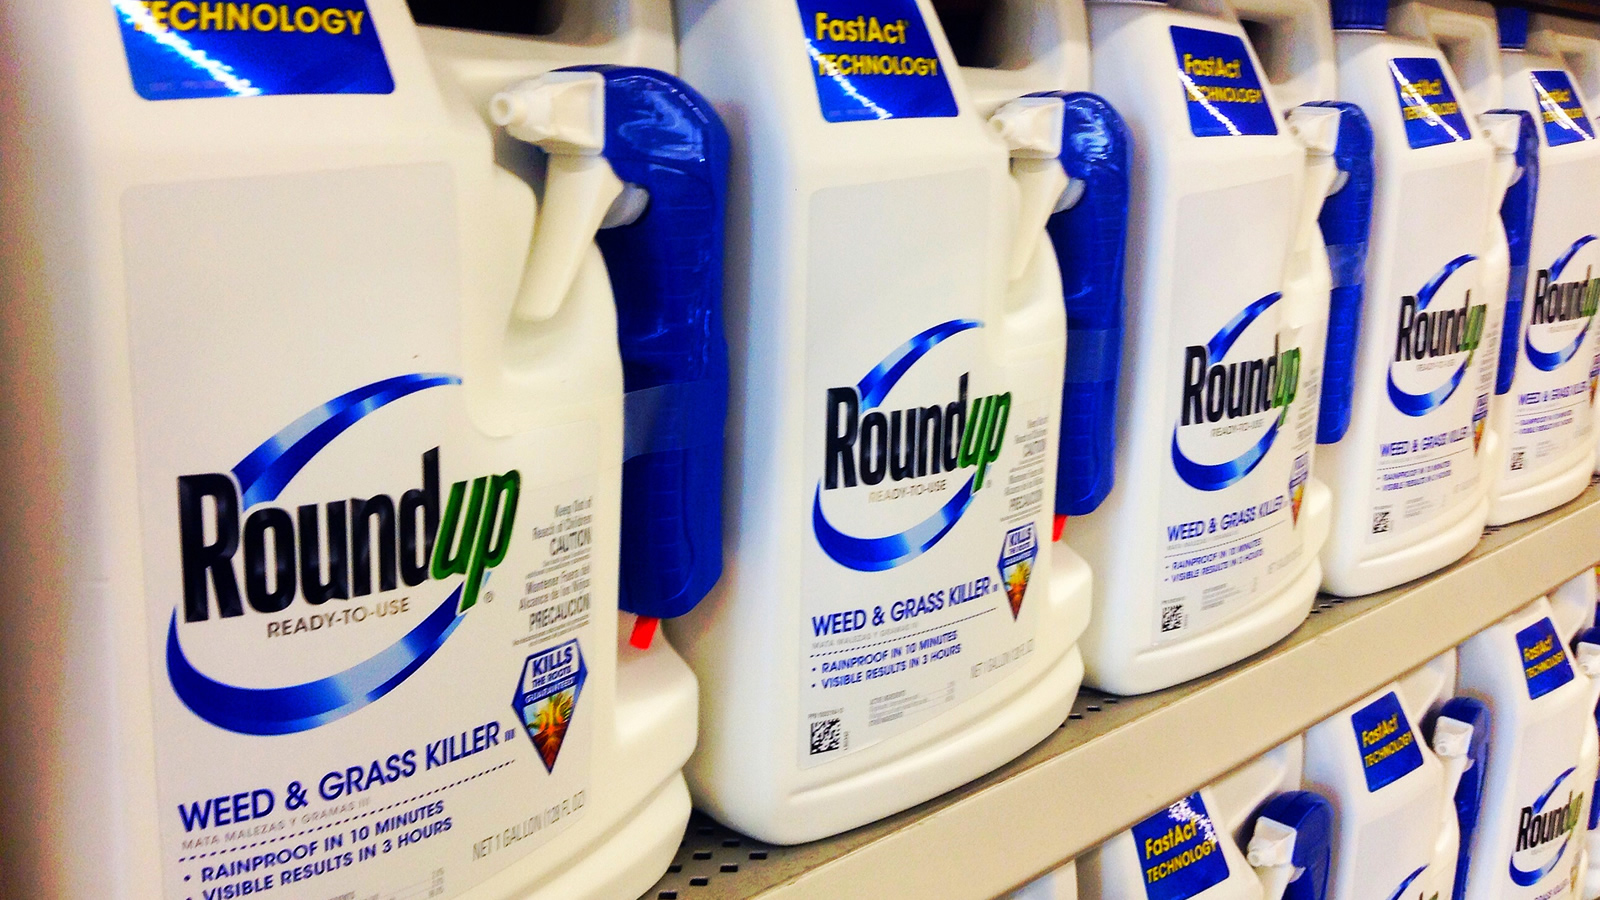 The weed killer Roundup has been linked to cancer. It's time to ban it.